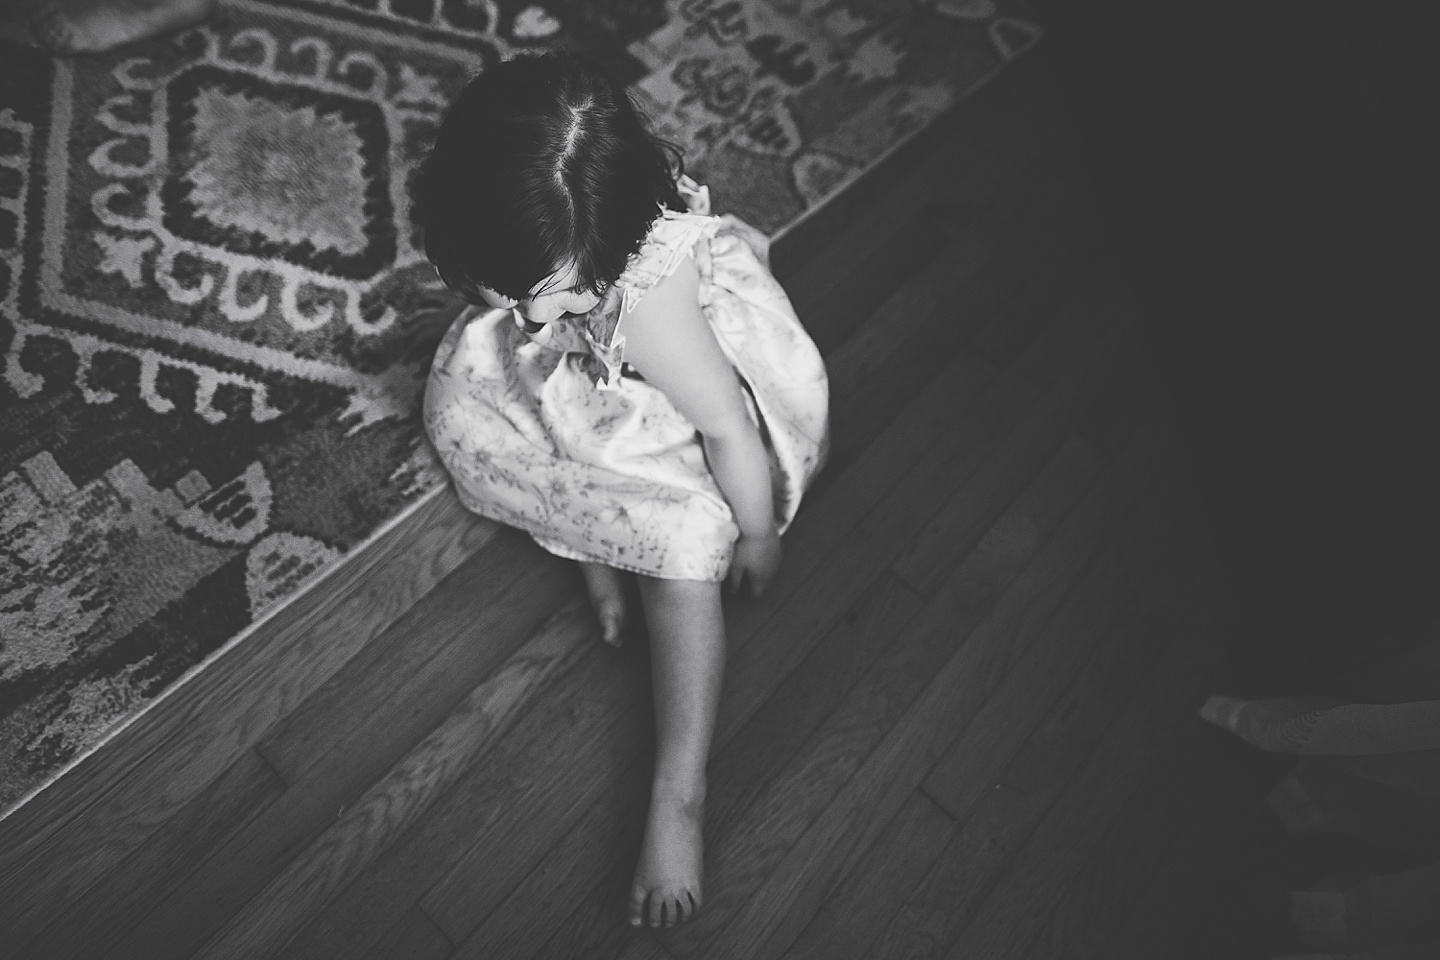 Girl sitting on the floor in a dress black and white image